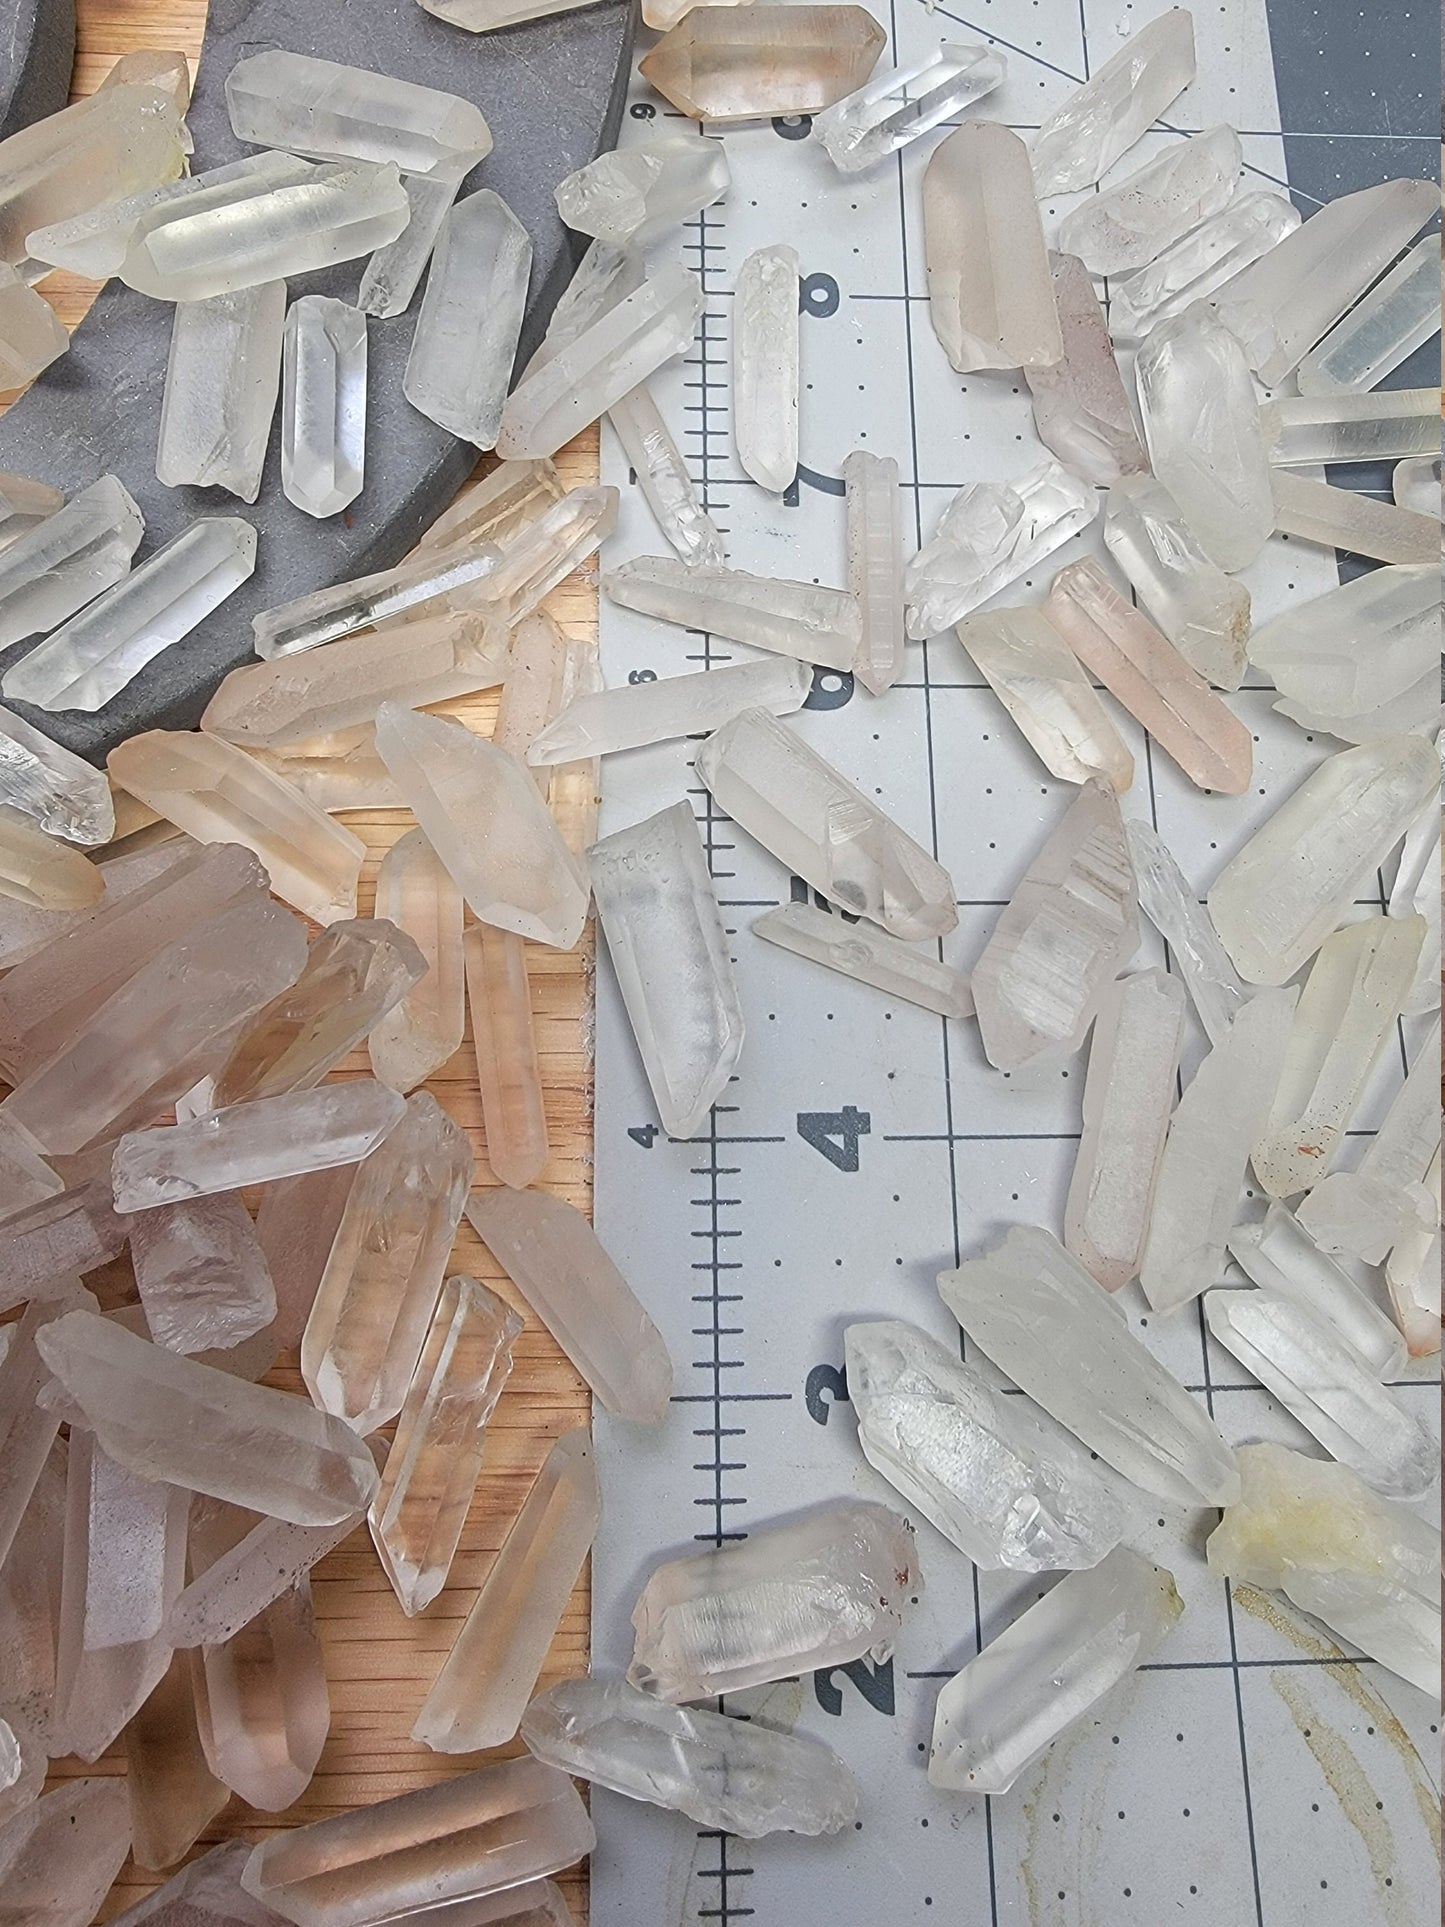 Quartz Crystal, (Approx. 7/8" - 1 1/4") 1280 One Natural Crystal, Quartz Rough, for Crystal Grid Making or Wire Wrapping